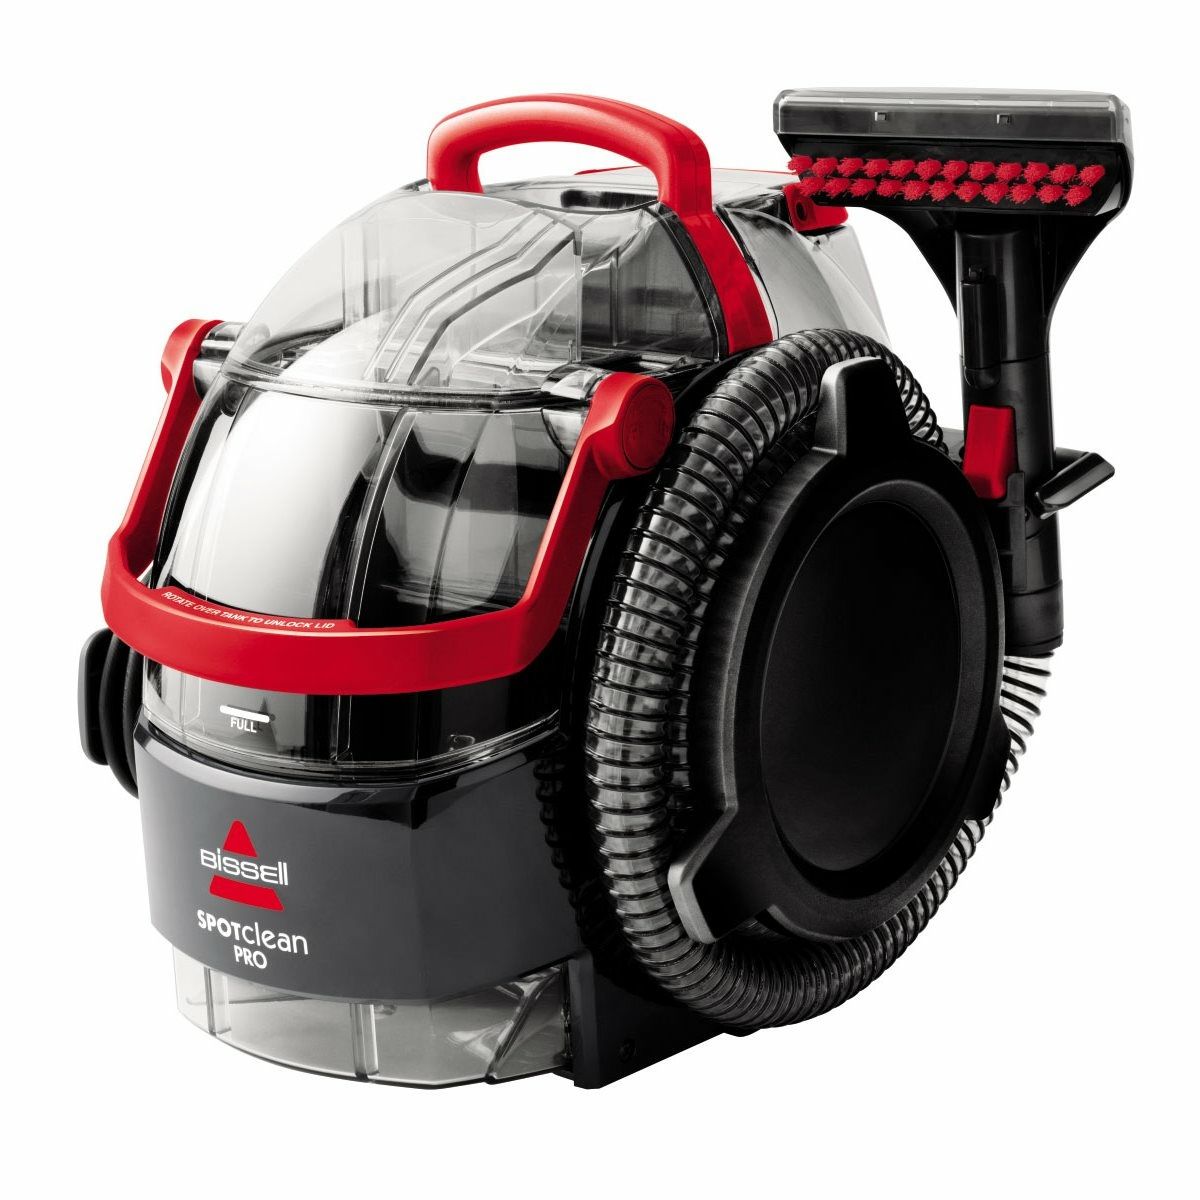 Bissell SpotClean Professional 1558N - 4home.cz